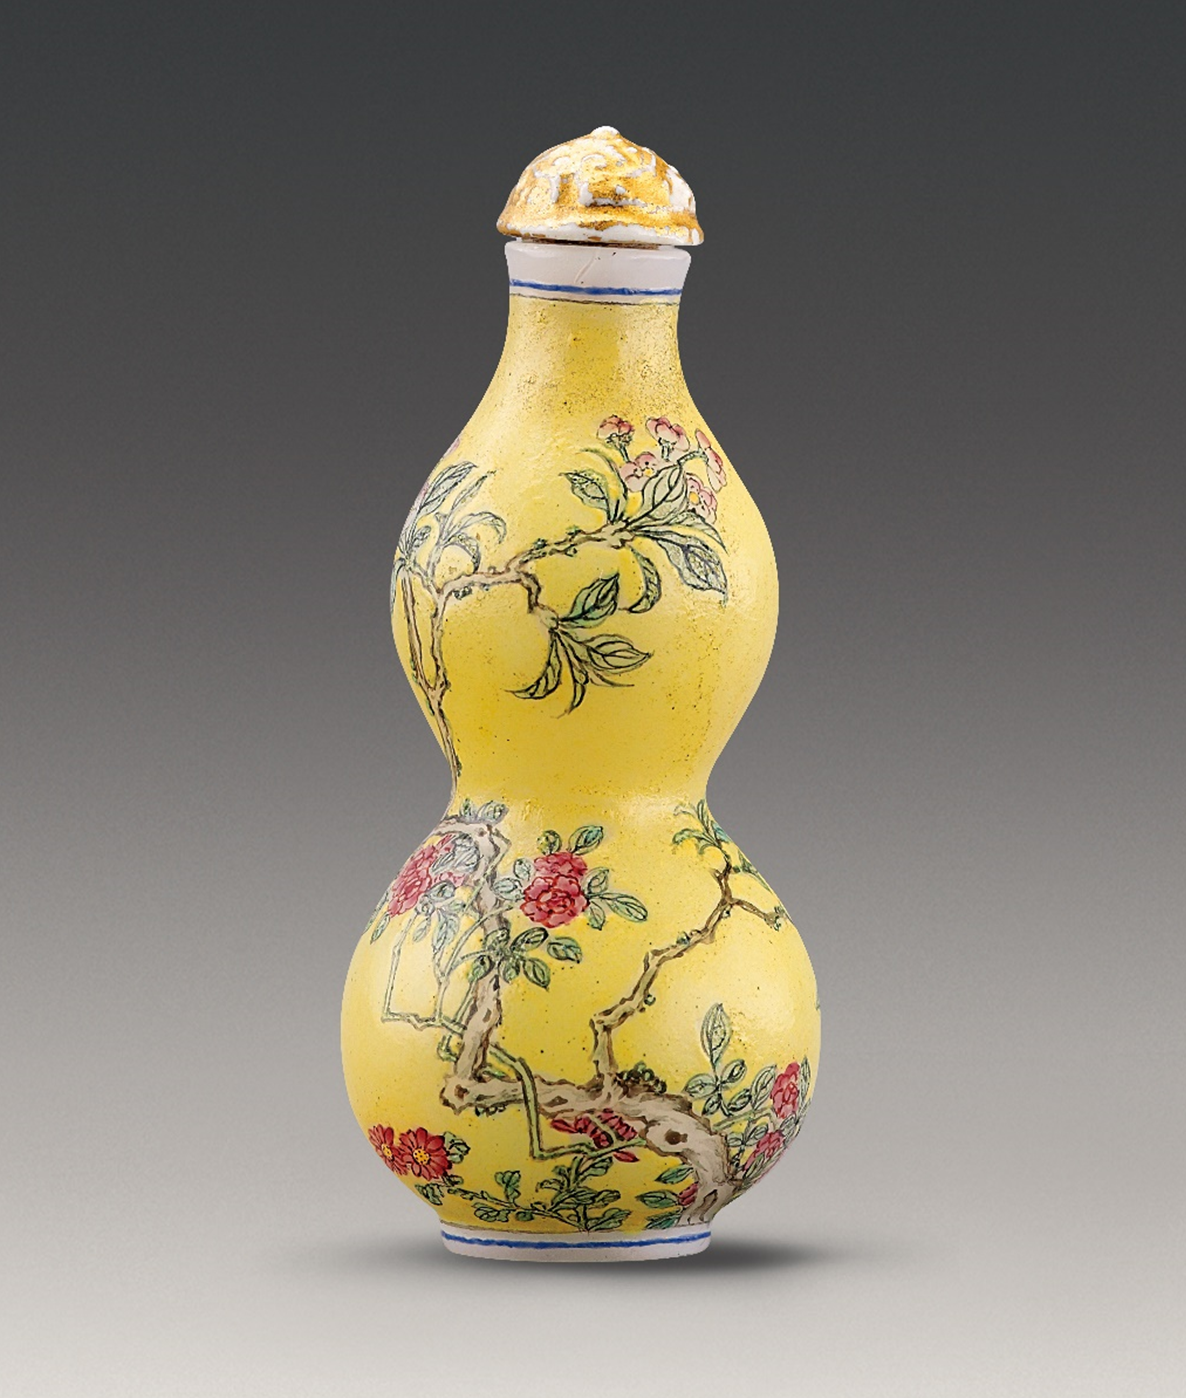 The Hong Kong Museum of Art today (September 28) announced that Christopher and Josephine Sin generously donated nearly 500 pieces of Chinese snuff bottles from the Fuyun Xuan Collection of Chinese Snuff Bottles for the museum's permanent collection. Picture shows the newly donated double-gourd-shaped glass snuff bottle with floral design in painted enamels on yellow ground. This particular snuff bottle, which Mr Sin insisted on acquiring even in his final days, showcases his deep fascination with snuff bottles.
